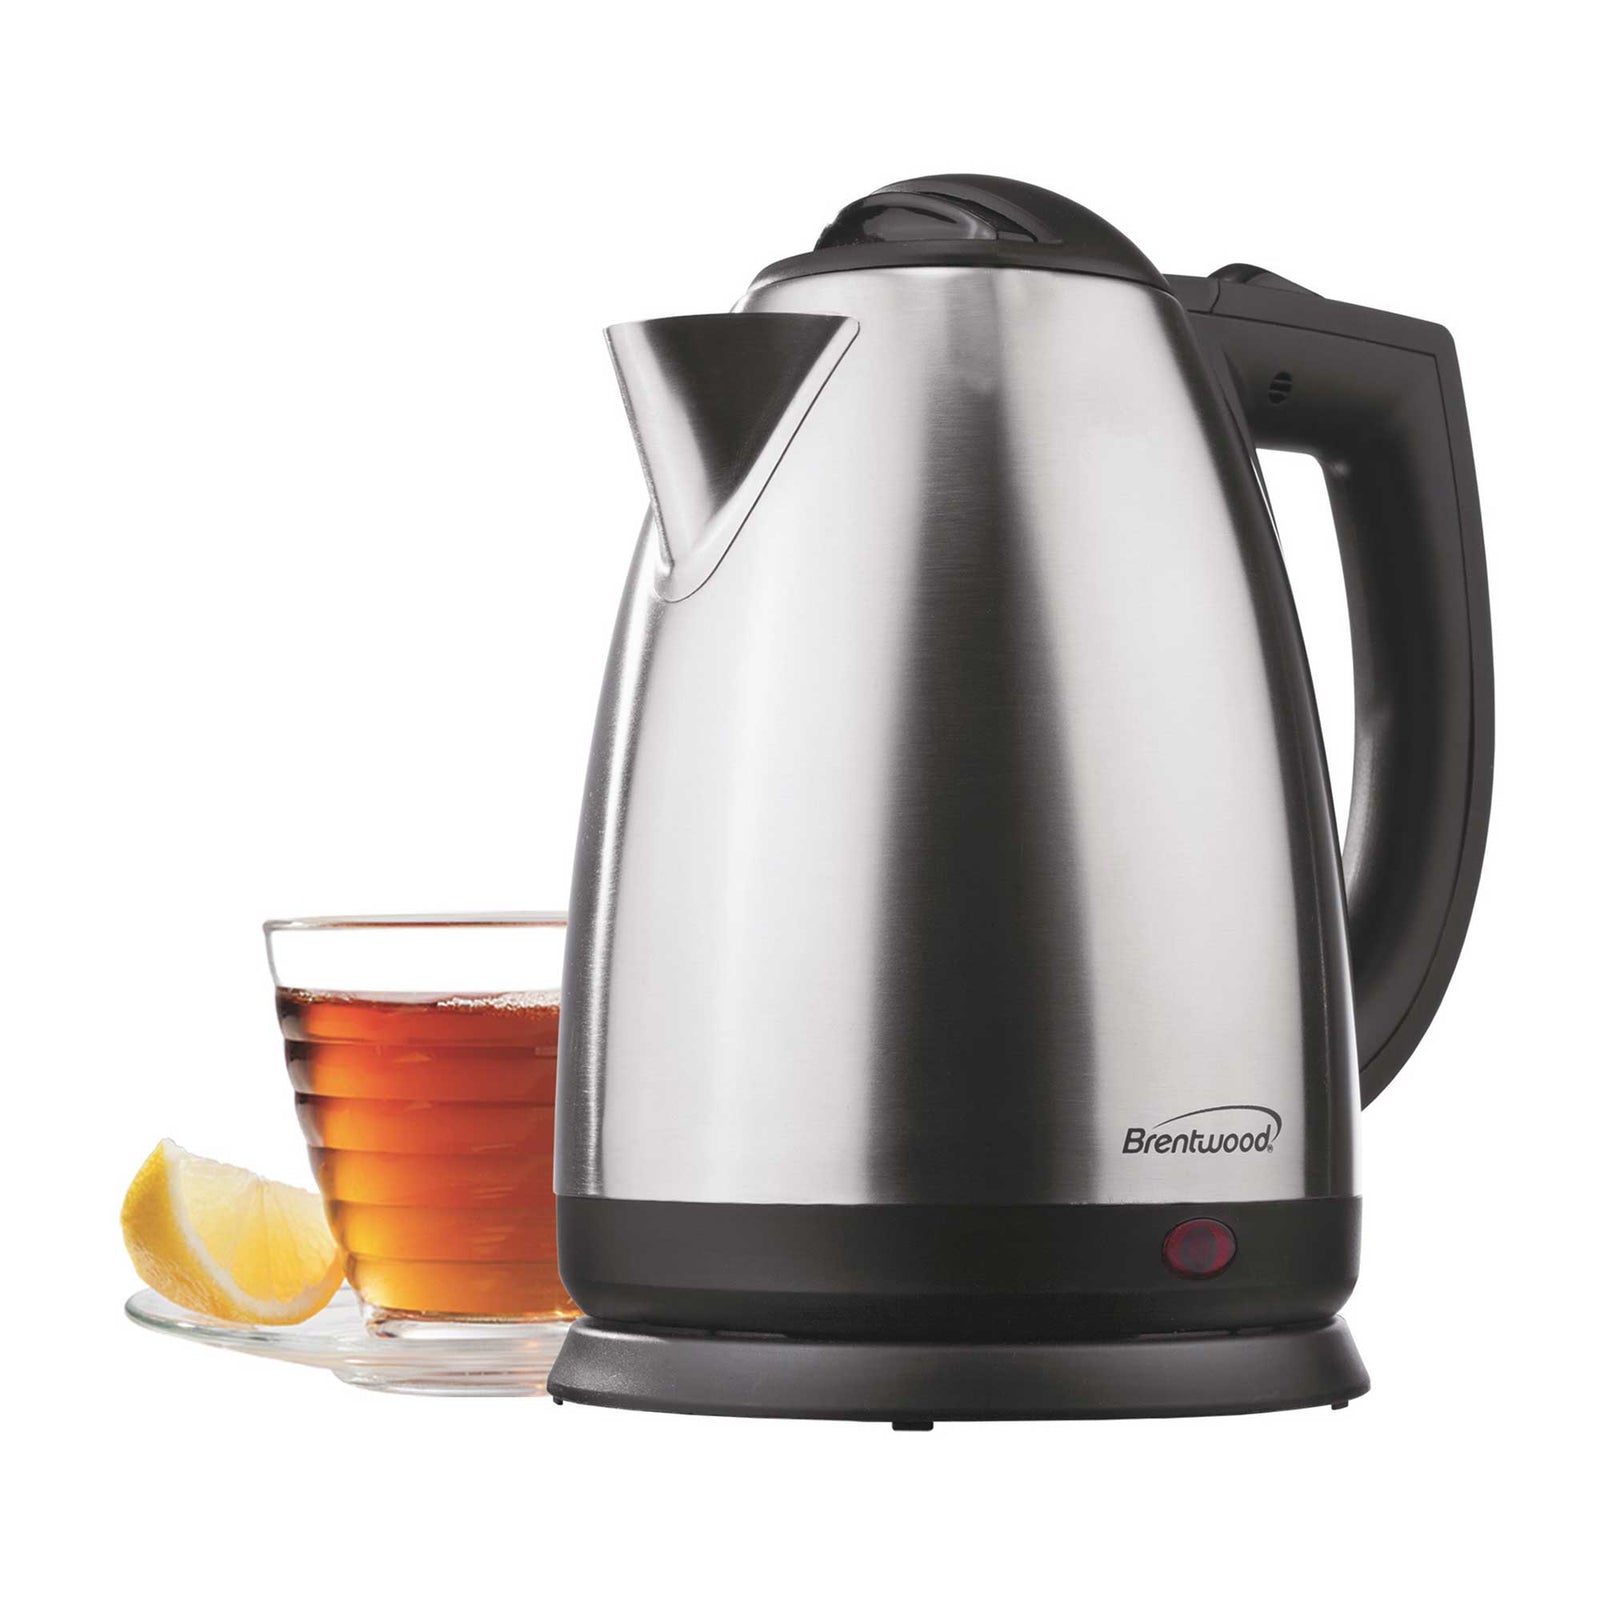  Brentwood KT-1617 1.7 Liter Cordless Electric Kettle, White:  Electric Hot Tea Machines: Home & Kitchen